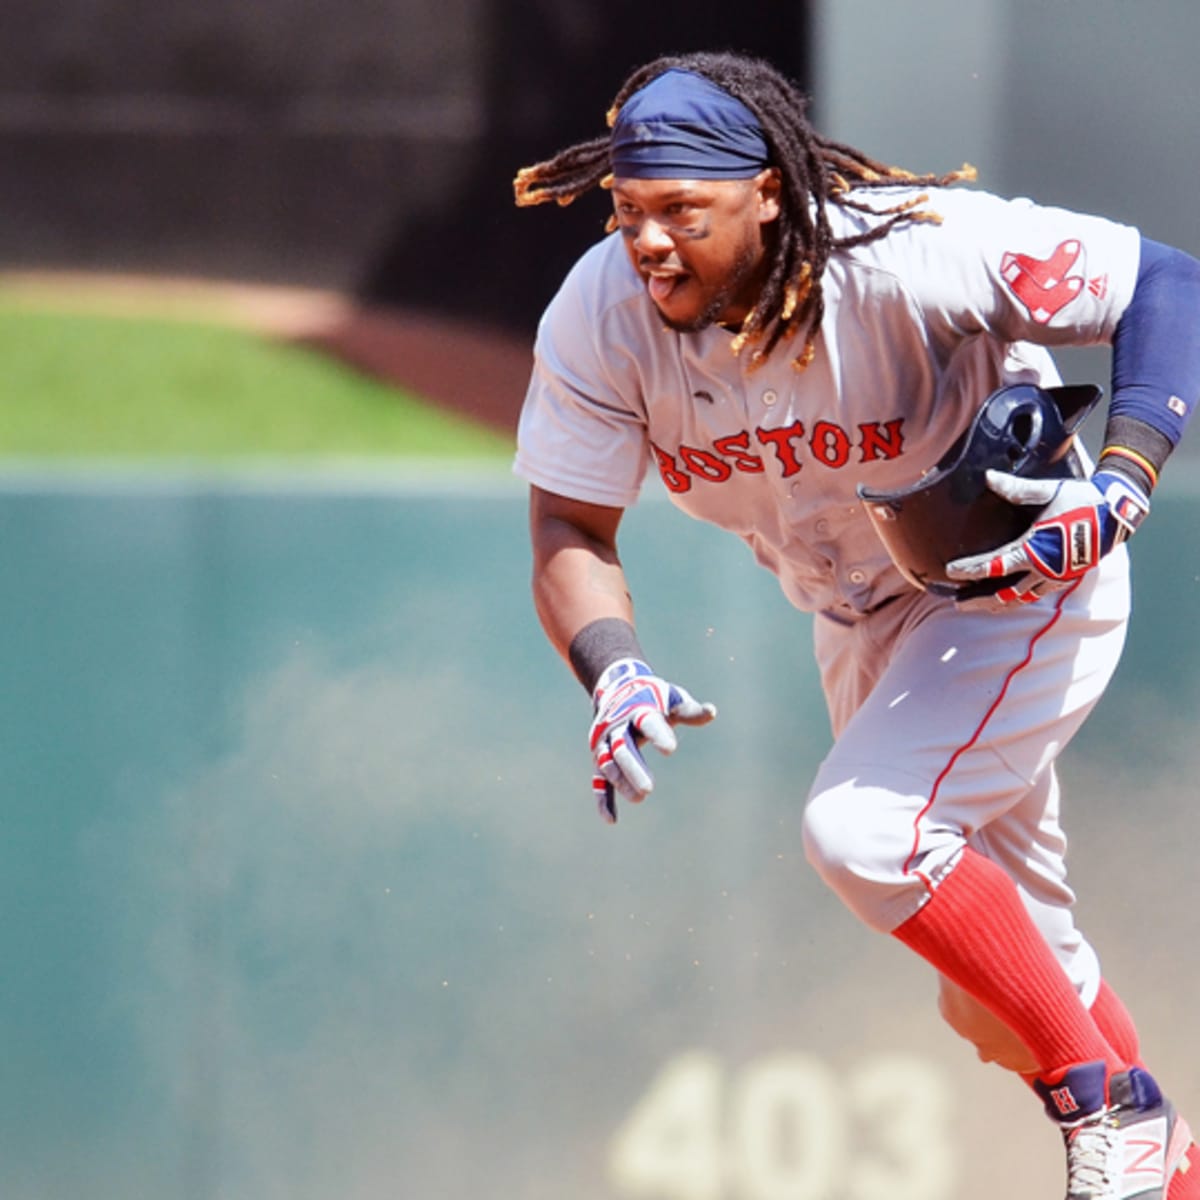 Red Sox' Hanley Ramirez runs with helmet in hand: Video - SI Kids: Sports  News for Kids, Kids Games and More